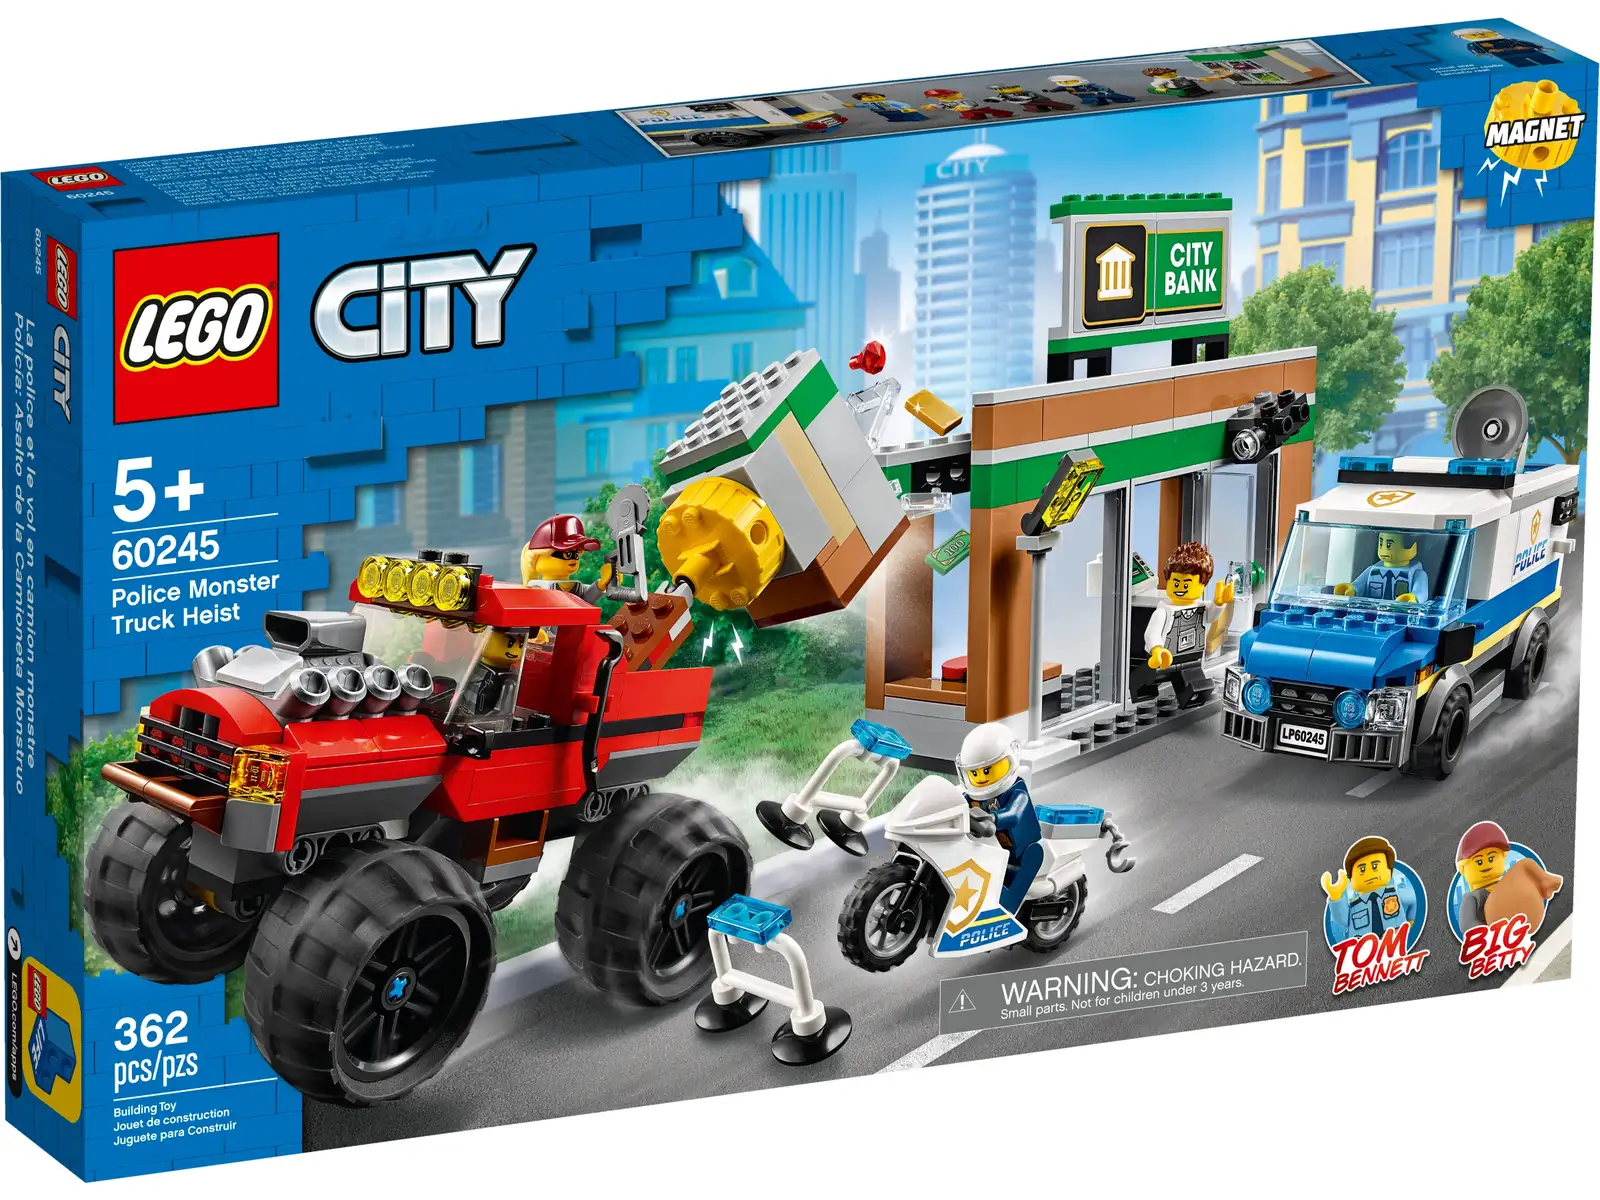 Mini action heroes and fans of the awesome LEGO® City TV series will love this LEGO City Police Monster Truck Heist (60245) action set, featuring police hero Tom Bennett and notorious crook Big Betty. The easy-to-follow building guide ensures that even budding LEGO builders can enjoy an immersive build-and-play experience. Kids' toy with lots of cool features If you're looking for feature-packed action toys that kids will love, this playset has it all. With 5 minifigures, a bank-busting monster truck toy armed with a huge magnet, a bank building with a magnetic safe and a police surveillance truck and motorcycle – the scene is set for action-packed fun. Building sets for kids Children love the open-ended role-play opportunities that LEGO City police sets provide. With a wide selection of realistic vehicles, detailed buildings and fun characters, kids can create realistic scenarios that depict real city life in a fun and imaginative way. Bring LEGO® City action home with this multi-model LEGO City police (60245) building set, featuring a crooks’ monster truck with a magnetic lifting arm, 2 LEGO City TV series characters and much more. Building set for kids featuring a crooks’ monster truck with magnetic arm, a toy bank building with magnetic safe, a police surveillance van and motorbike, plus police hero Tom Bennett and crook Big Betty minifigures. The police surveillance van and bank building have detailed interiors, and kids can pull the safe from the bank wall with the monster truck’s magnetic arm. This set can be combined with other original LEGO® sets. Ideal for children aged 5 and up, this set requires only basic building skills. It makes a great Christmas, birthday or any-other-day gift for kids who love action toys and for fans of the LEGO® City TV series. When built, the monster truck measures over 3" (8cm) high, 6" (17cm) long and 3" (9cm) wide, while the police surveillance van measures over 3" (8cm) high, 4" (12cm) long and 2" (6cm) wide. You’re in luck! No batteries required – the vehicles in this LEGO® City police playset are powered by small kids with big imaginations, so the play can start right away. It’s easy to get started with this LEGO® toy. Inside the box you'll find easy-to-follow building instructions – so simply tear open the brick bags and let the fun begin! LEGO® City police playsets feature realistic toy buildings, cool vehicles and fun characters that inspire open-ended creative play, while helping youngsters improve physical skills and grow confidence. LEGO® building sets meet the highest industry standards to ensure that LEGO City playsets are consistent and compatible, and that all LEGO pieces easily connect and pull apart – every time. At The LEGO Group, we put all LEGO® pieces through rigorous tests to ensure every one of our toy playsets meets the highest global safety and quality standards.